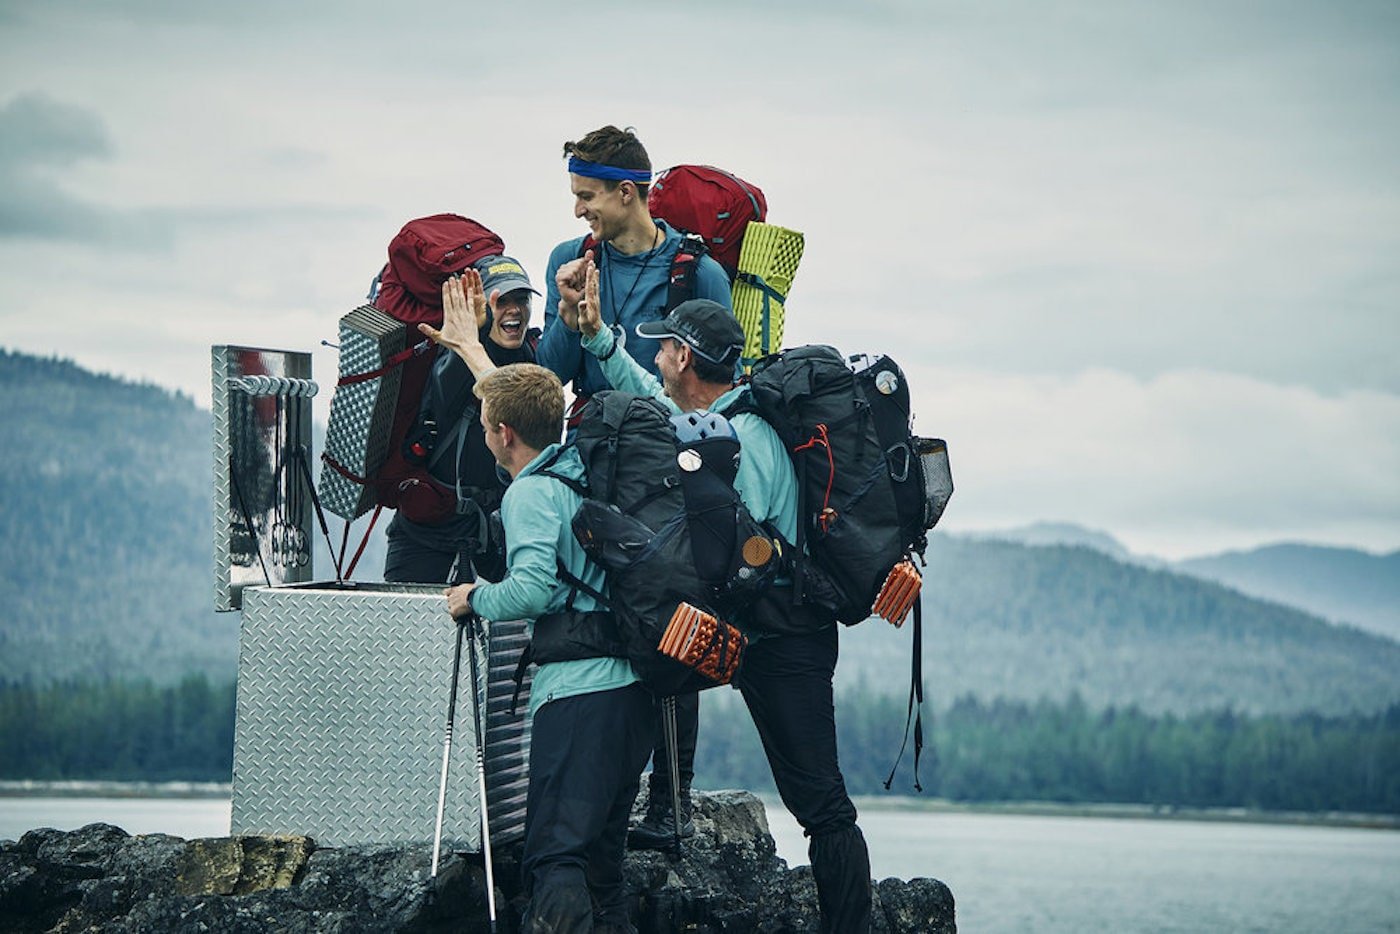 'Race to Survive Alaska' Cast Roundup Who Are the Competitors?